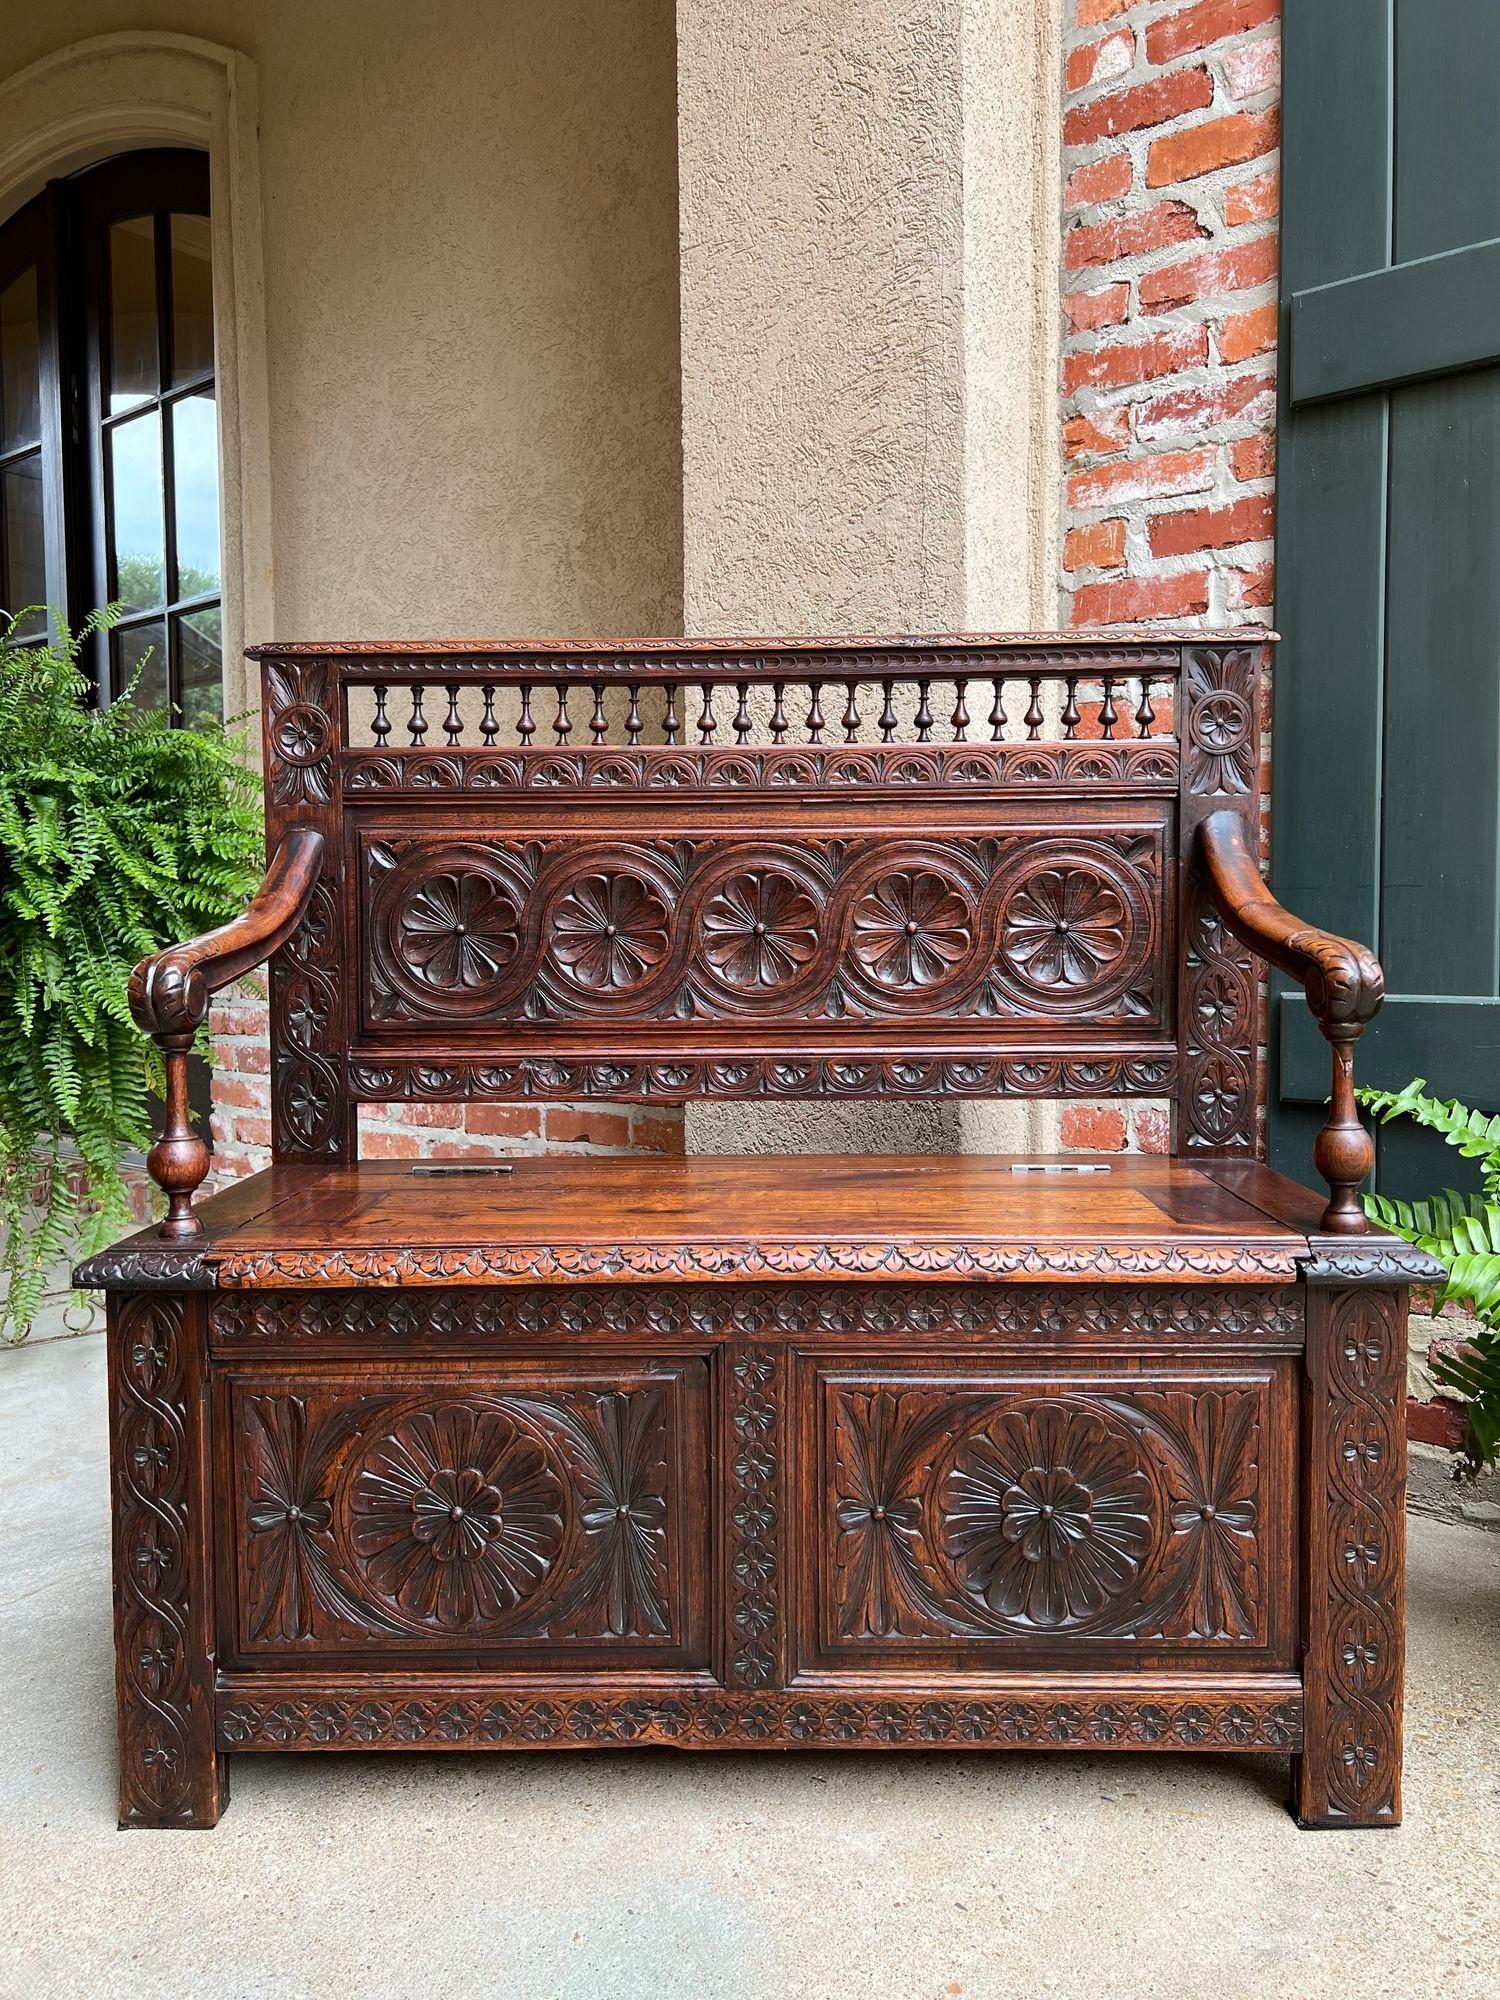 Petite Antique French Carved Oak Hall Bench Breton Brittany Pew Chest Trunk.

Direct from France, a wonderful petite antique French hall bench, with a charming combination of French style and versatile size.
Intricate Brittany details include a